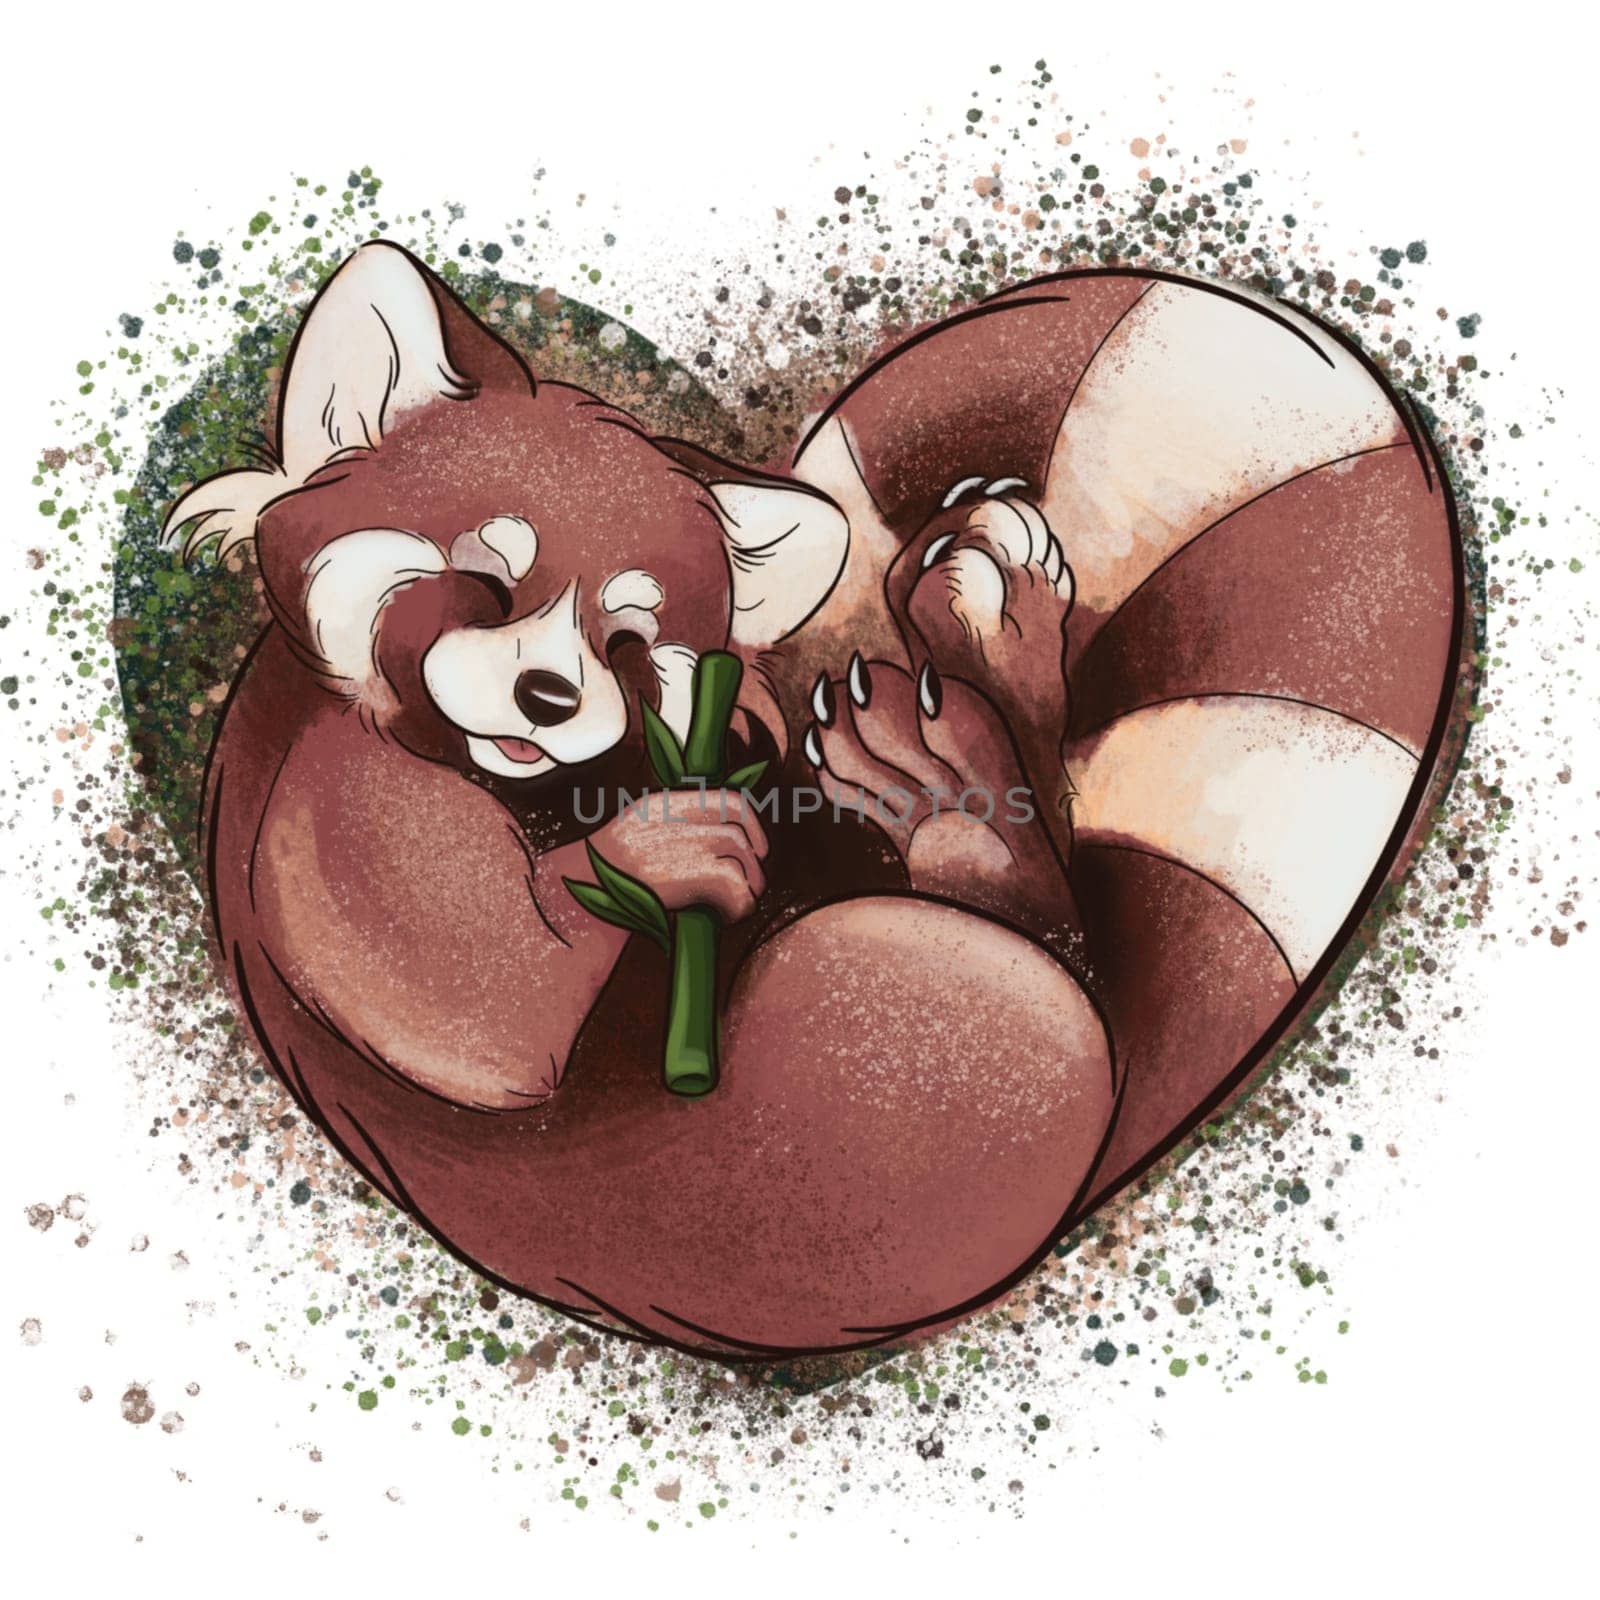 red panda in the form of a heart with bamboo paws by kr0k0